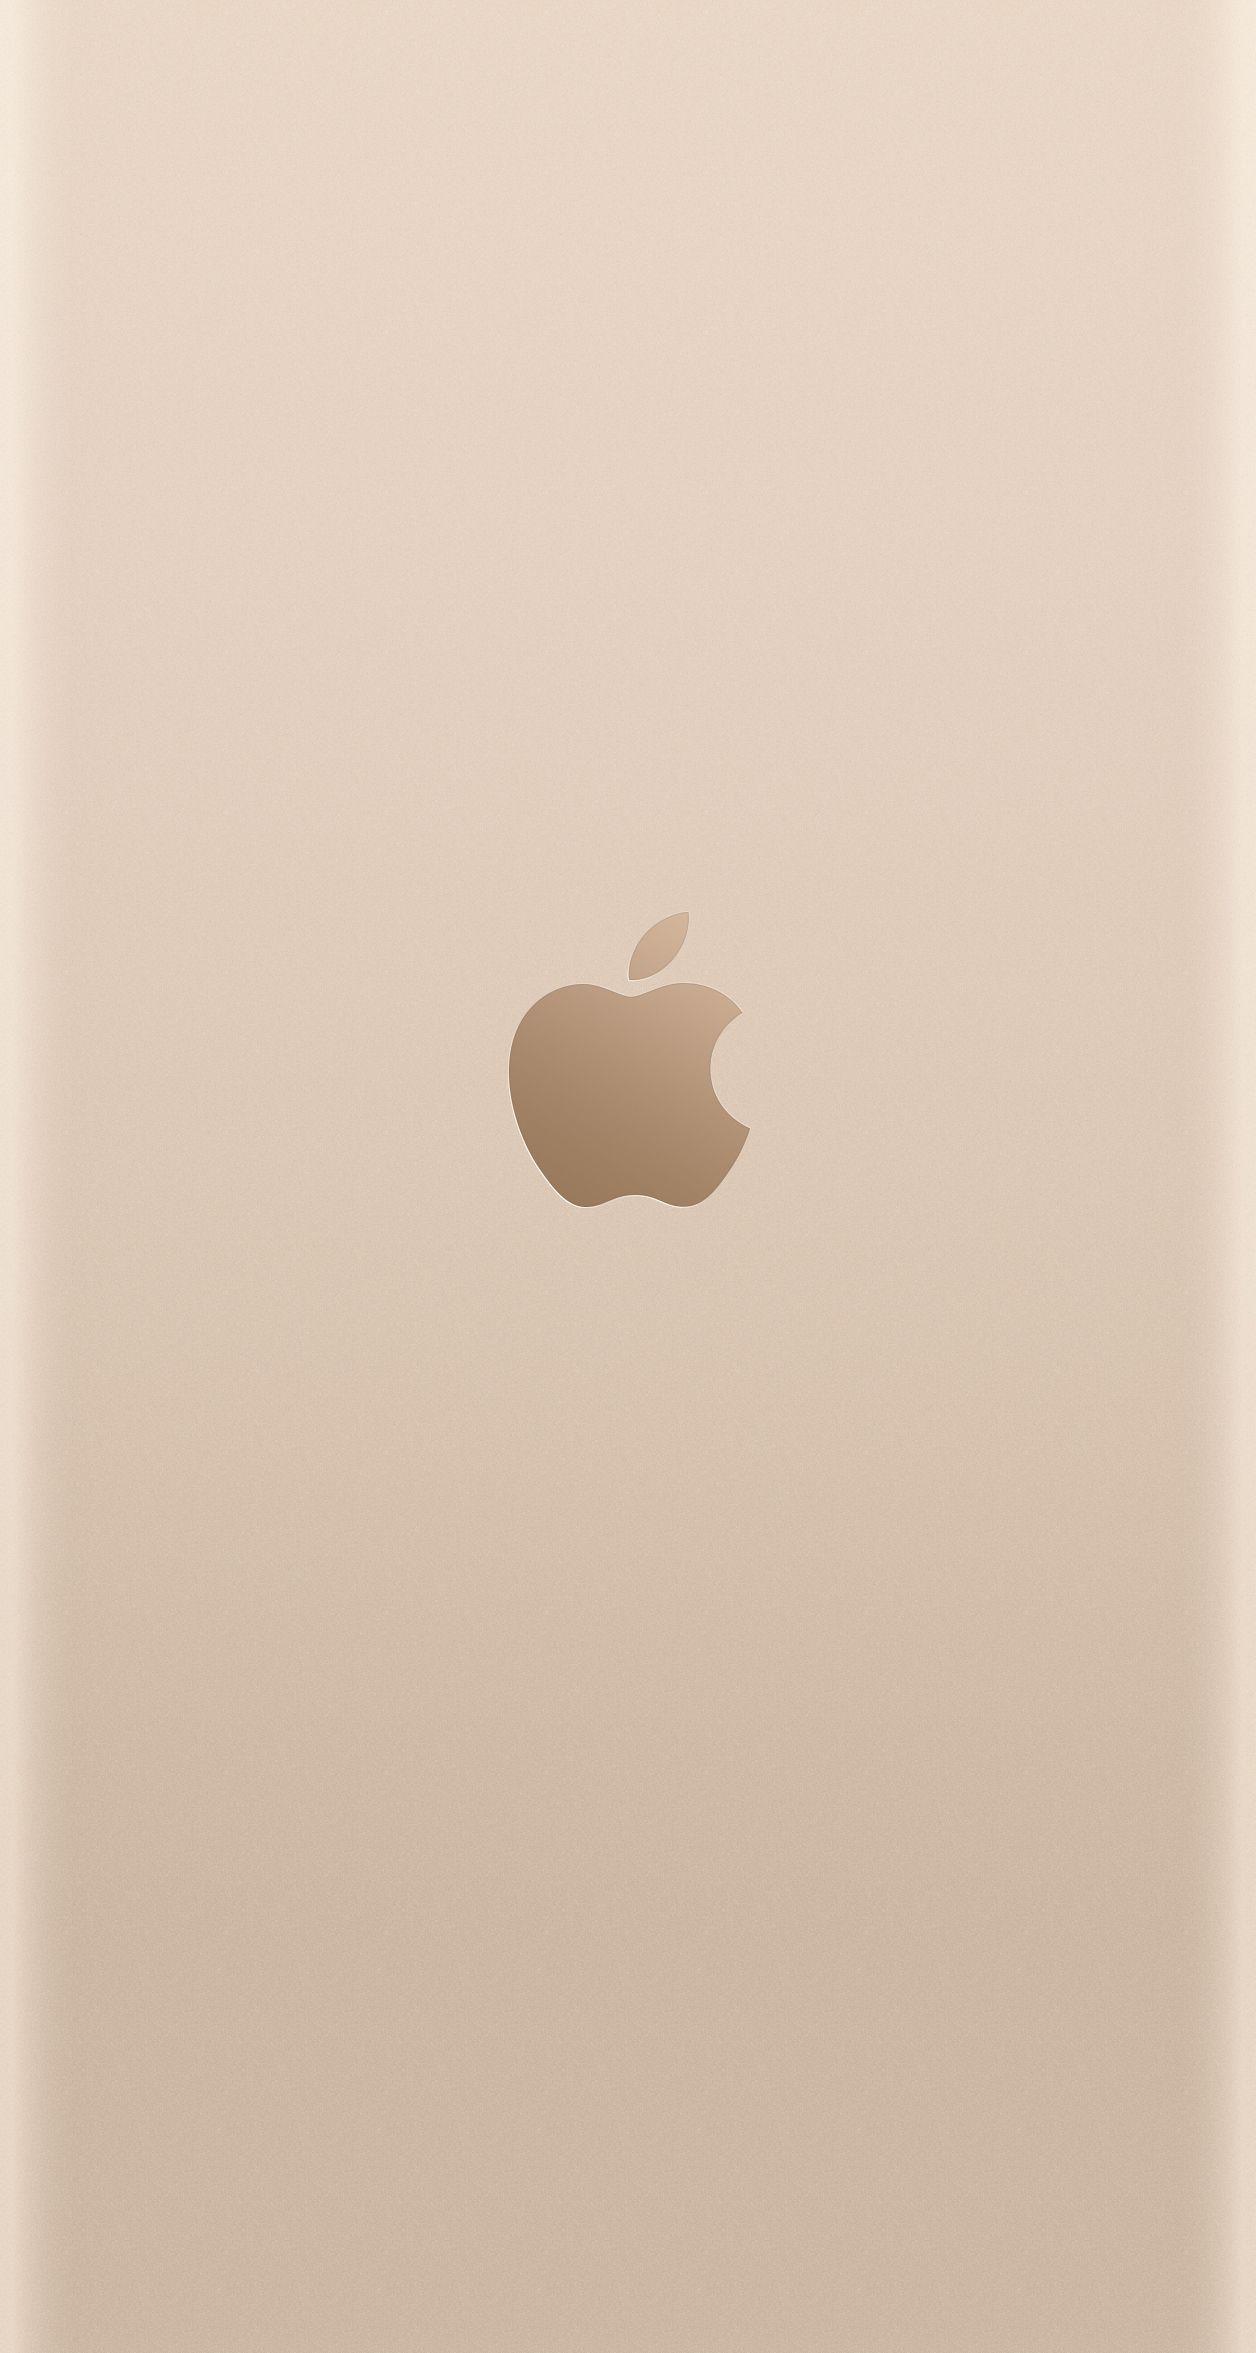 Gold iPhone Logo - Apple logo wallpaper for iPhone 6